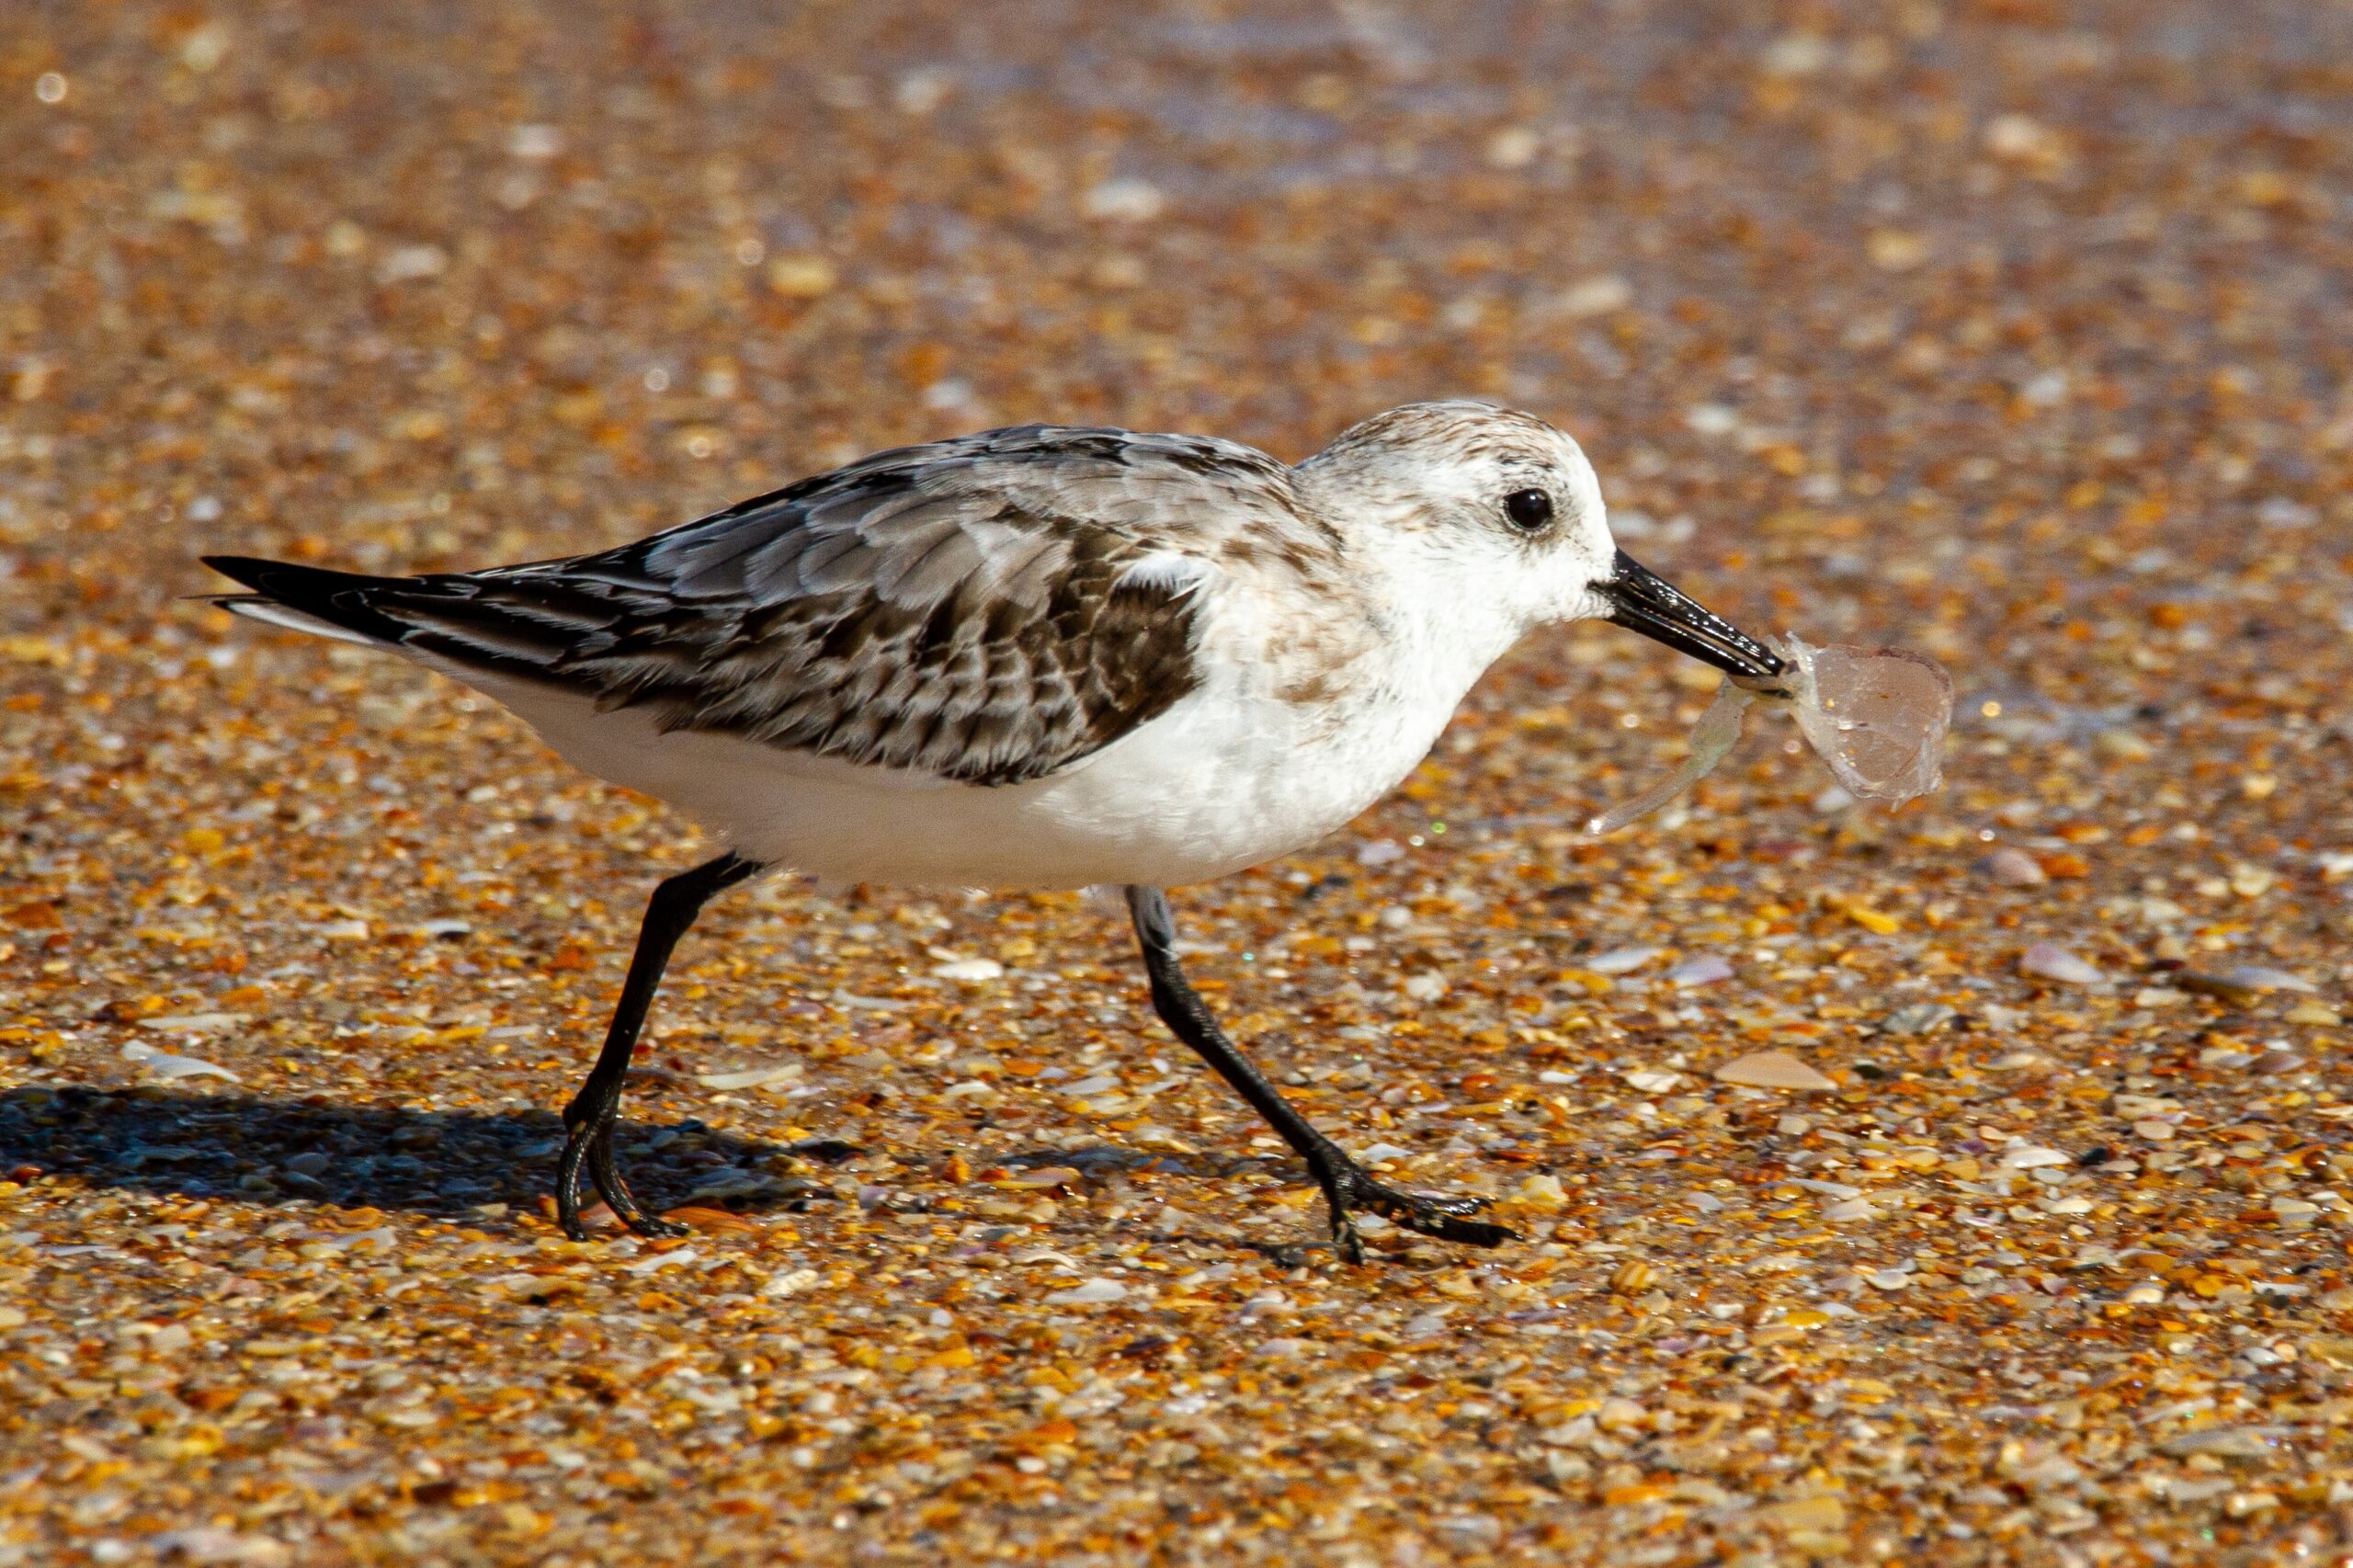 Shorebird breakfasts come with a side of plastic